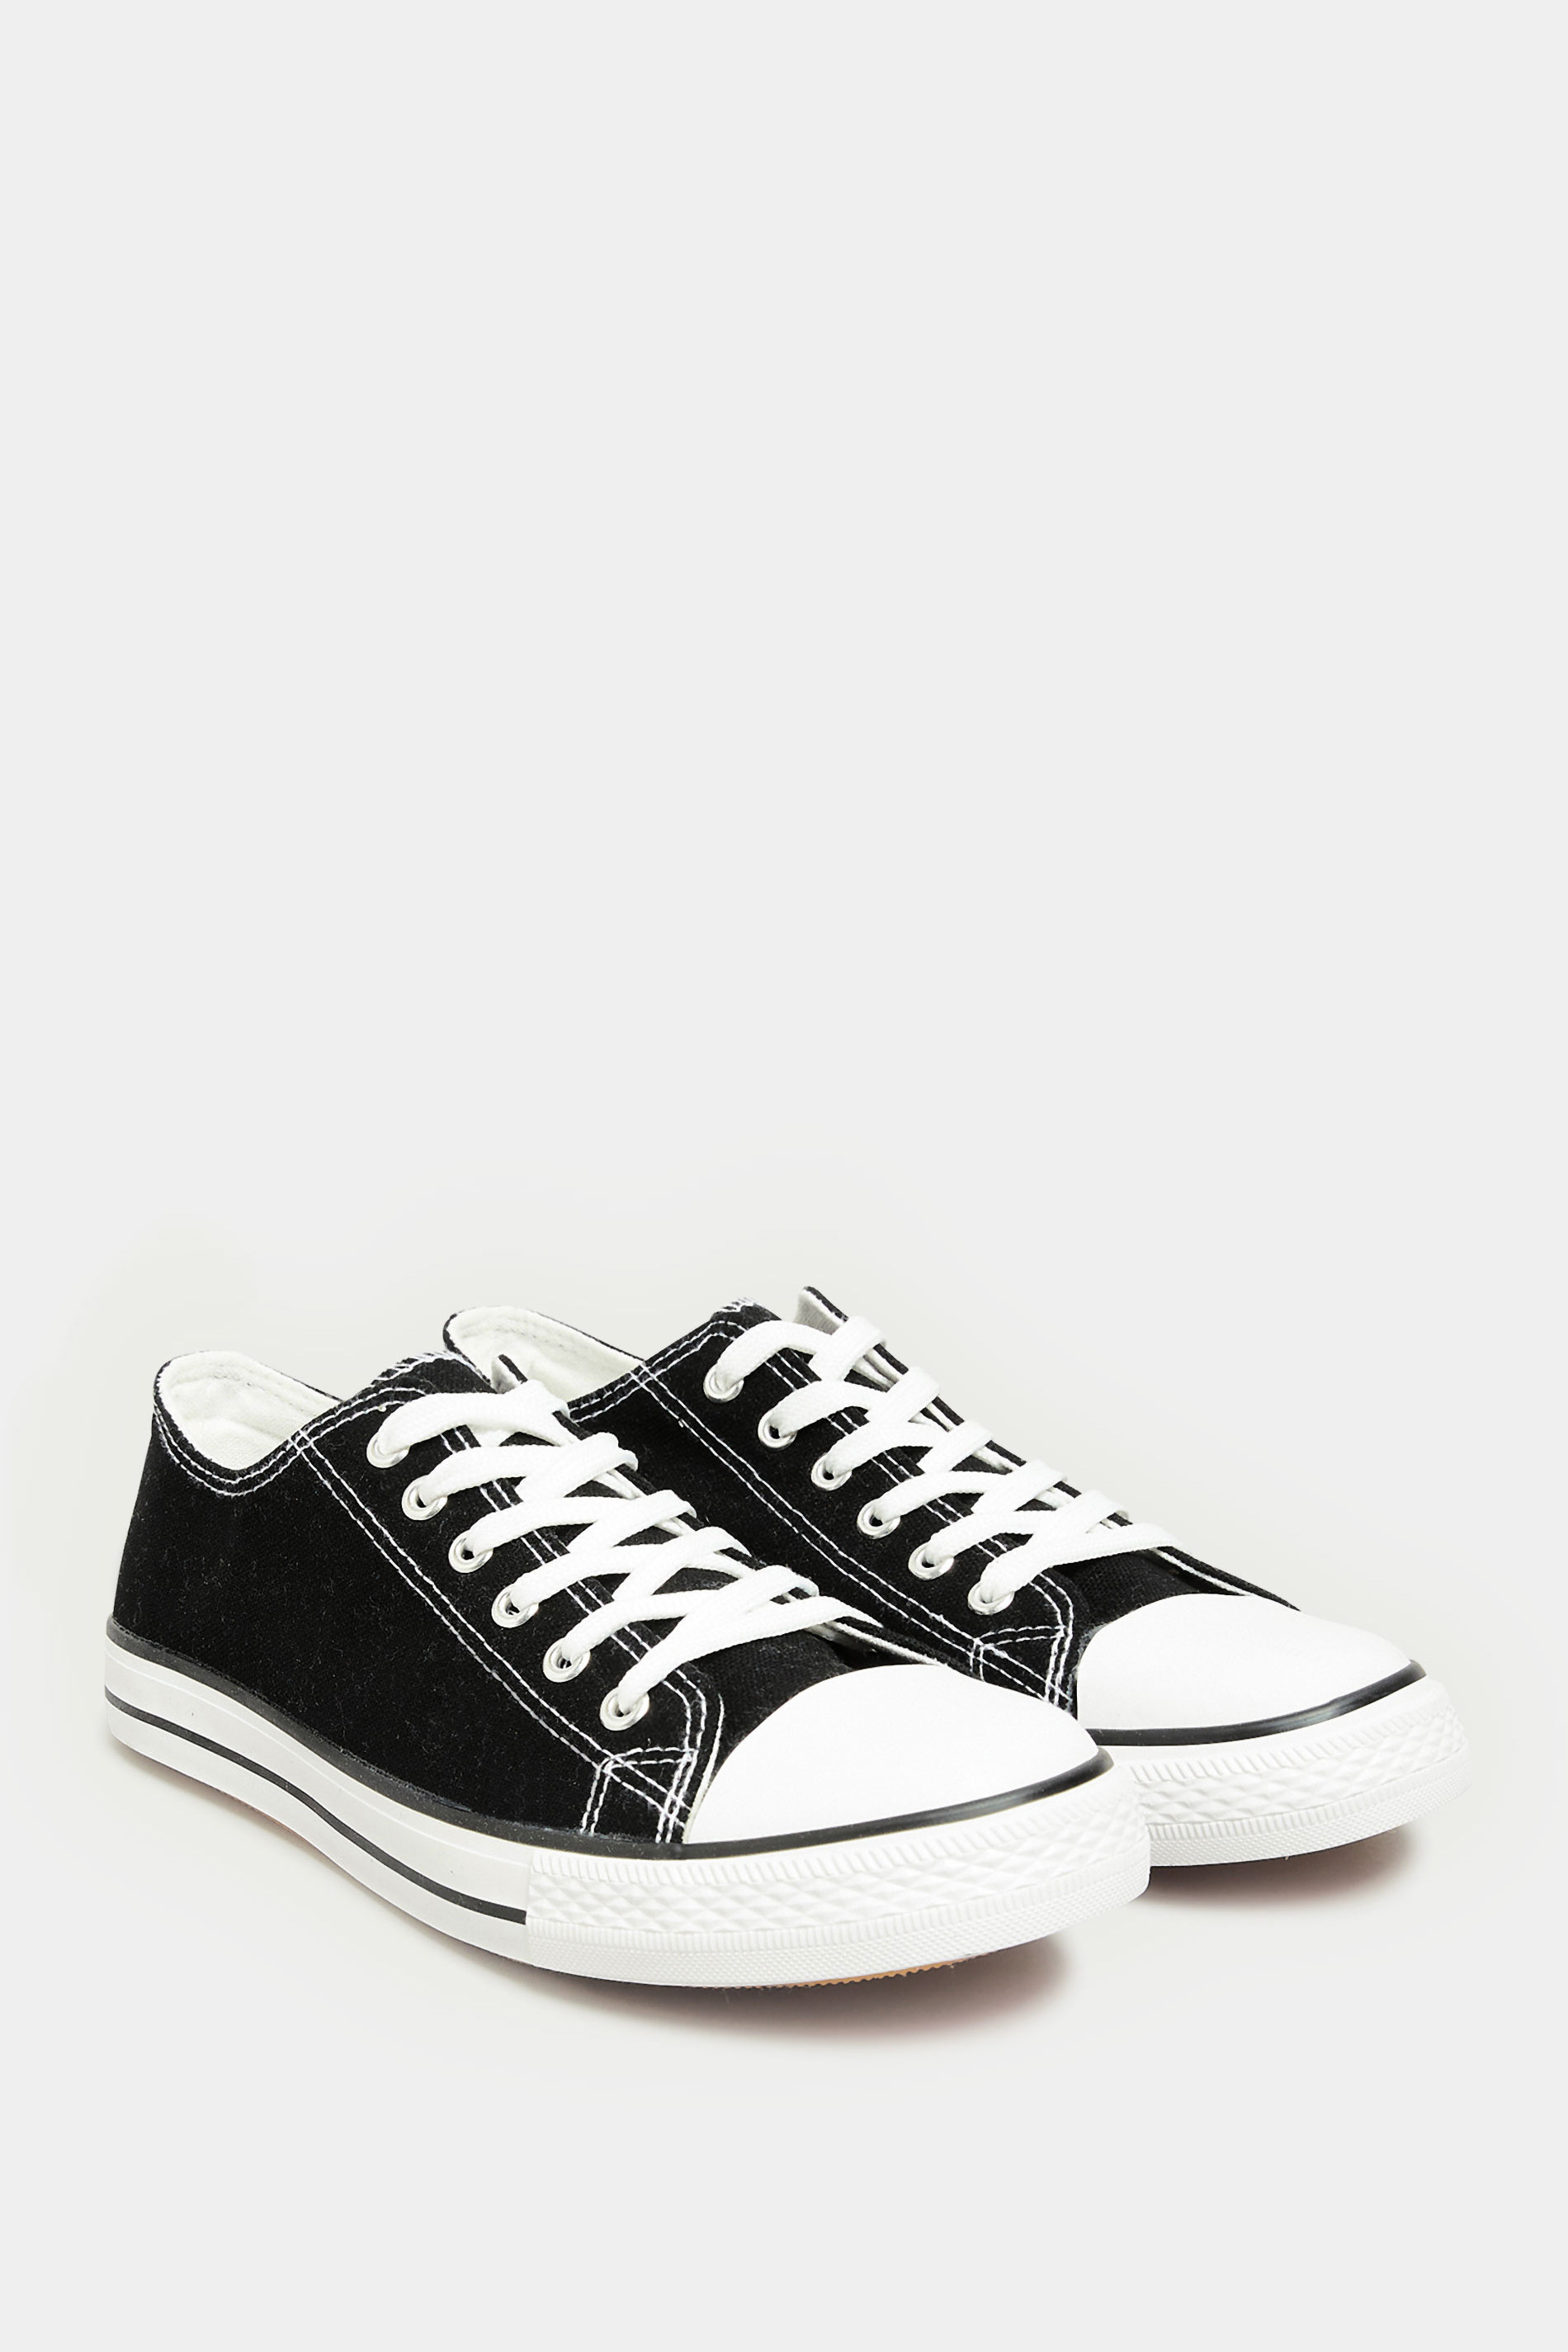 LTS Black Canvas Low Trainers In Standard Fit | Long Tall Sally  2